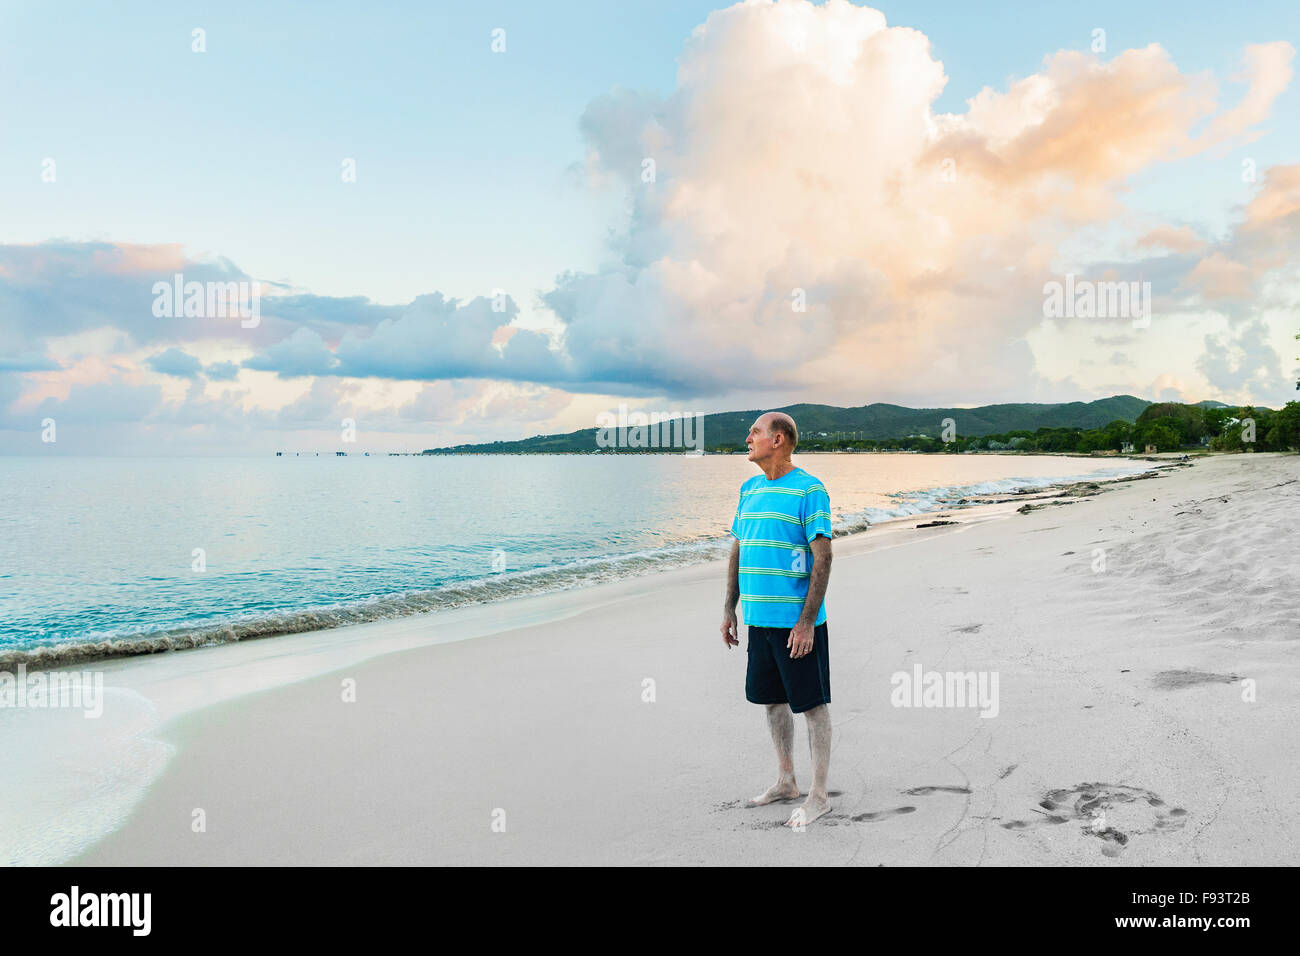 A 77 year old Caucasian man standing on the beach at sunrise on St. Croix, U.S. Virgin Islands. Stock Photo